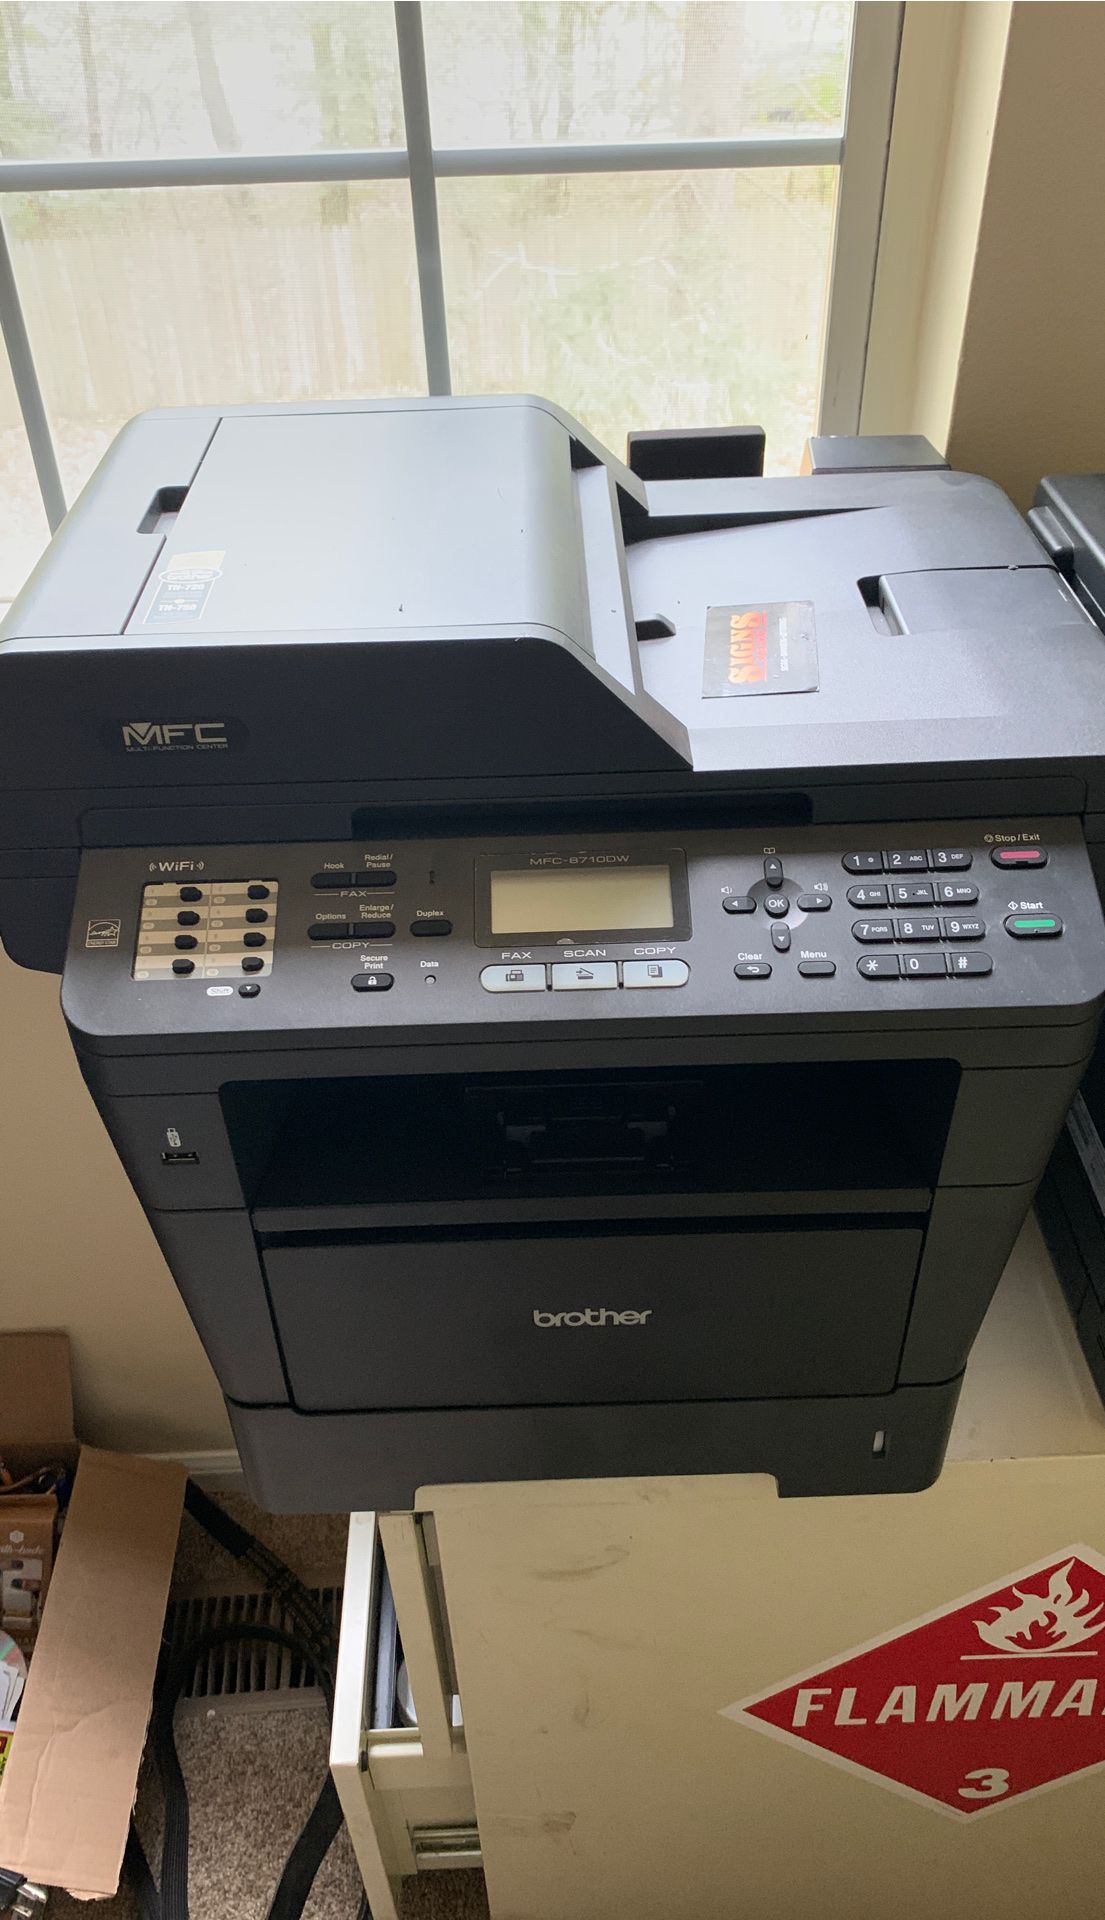 Brother printer & Scanner with monitor